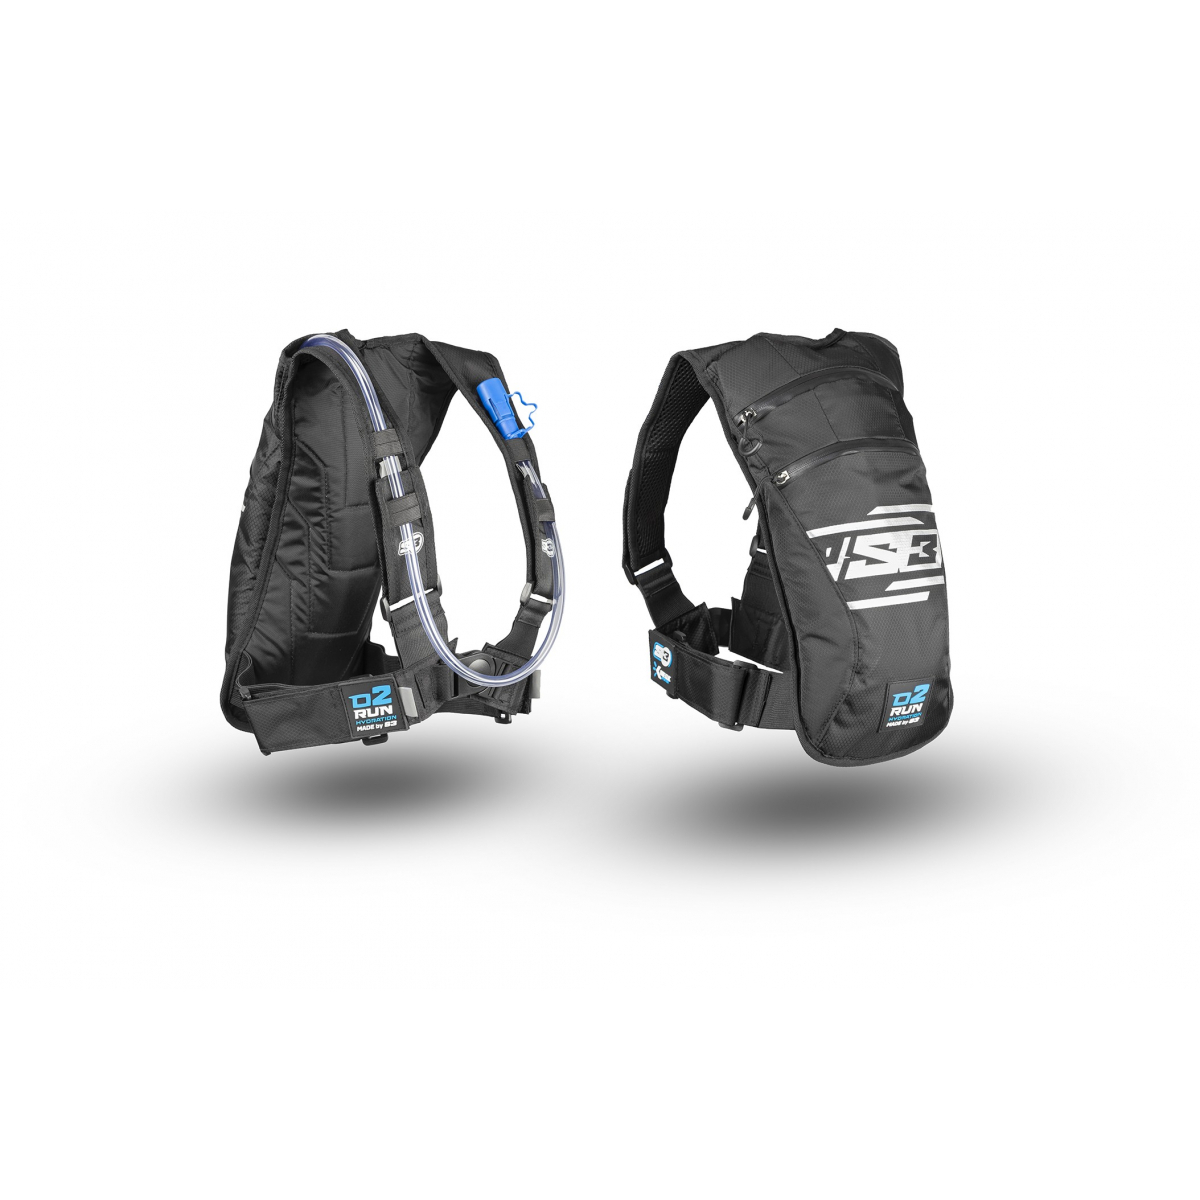 S3 O2Run Hydration Backpack - 1 litre.